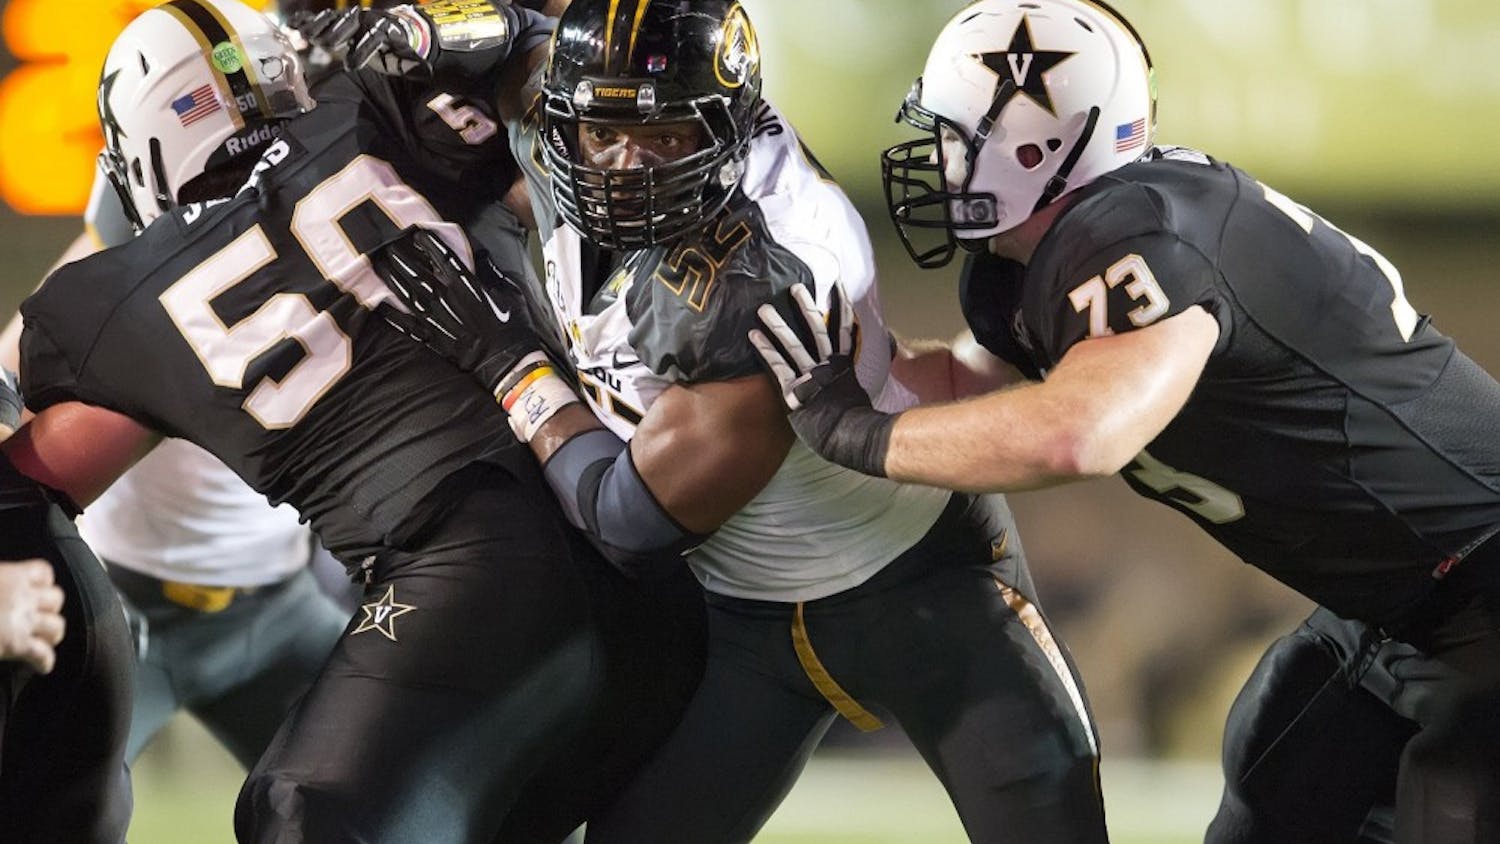 Missouri Tigers defensive lineman Michael Sam, center, on Sunday, Feb. 9, 2014, became the most prominent, and apparently the first, active male athlete on the major U.S. sports scene to publicly disclose that he's gay. Sam is seen during a college football game against Vanderbilt in this October 5, 2013, file photo. (David Eulitt/Kansas City Star/MCT)